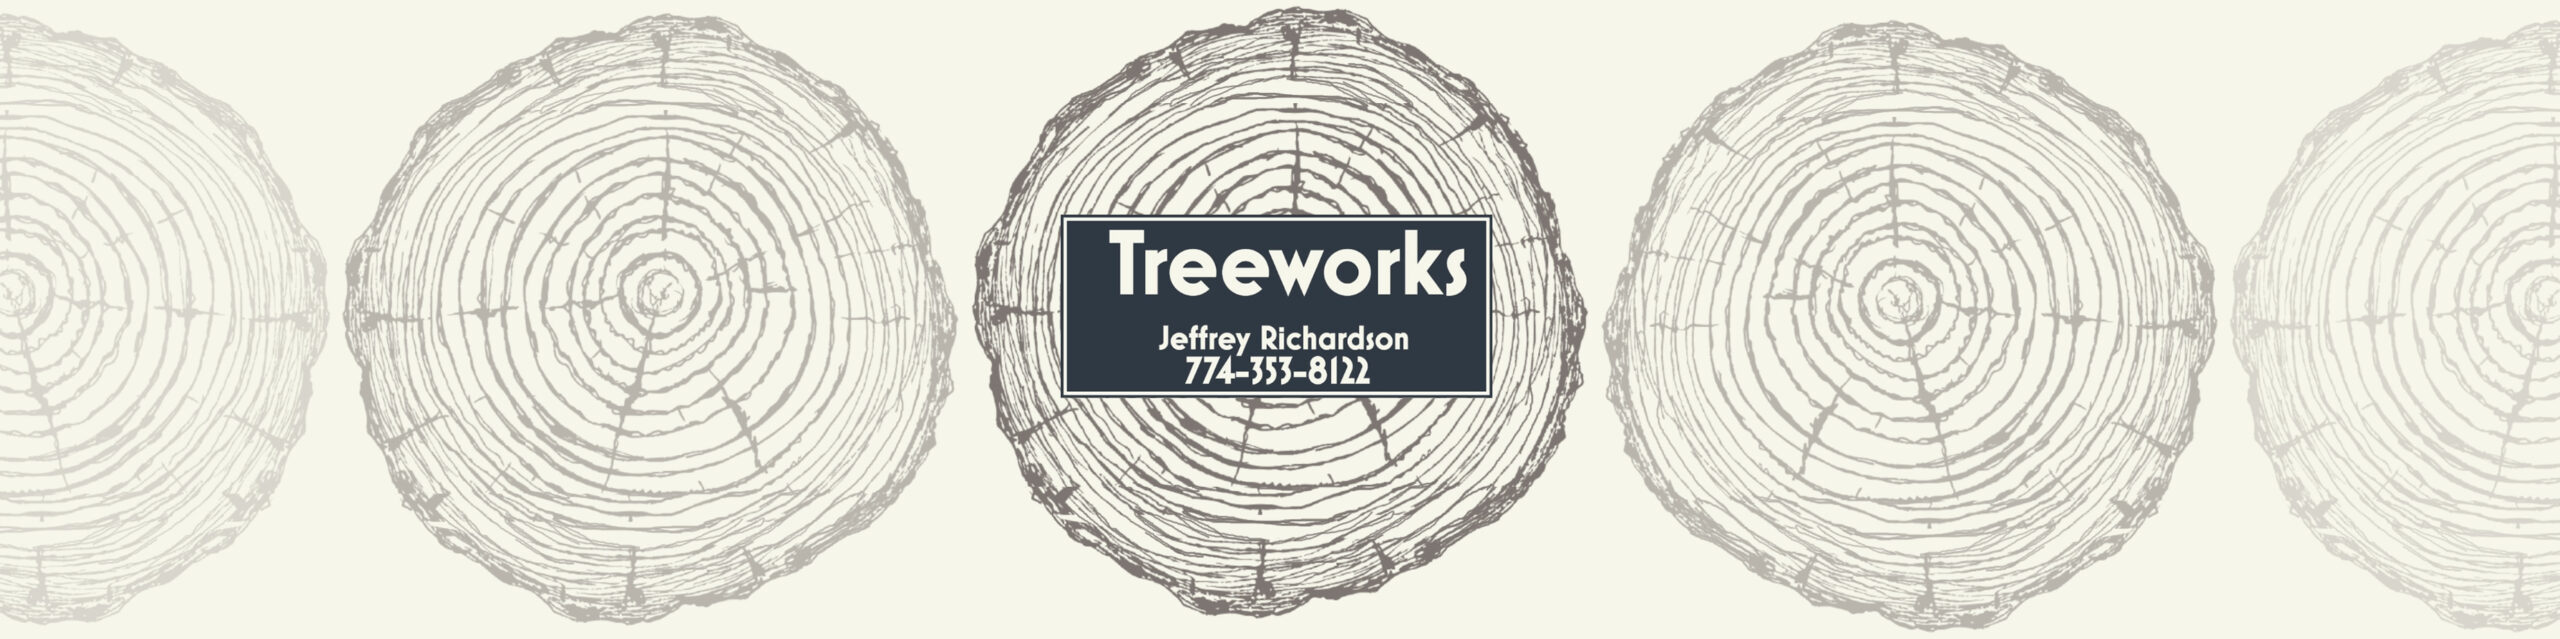 tree-removal-cape-cod-stumps-branches-treeworks